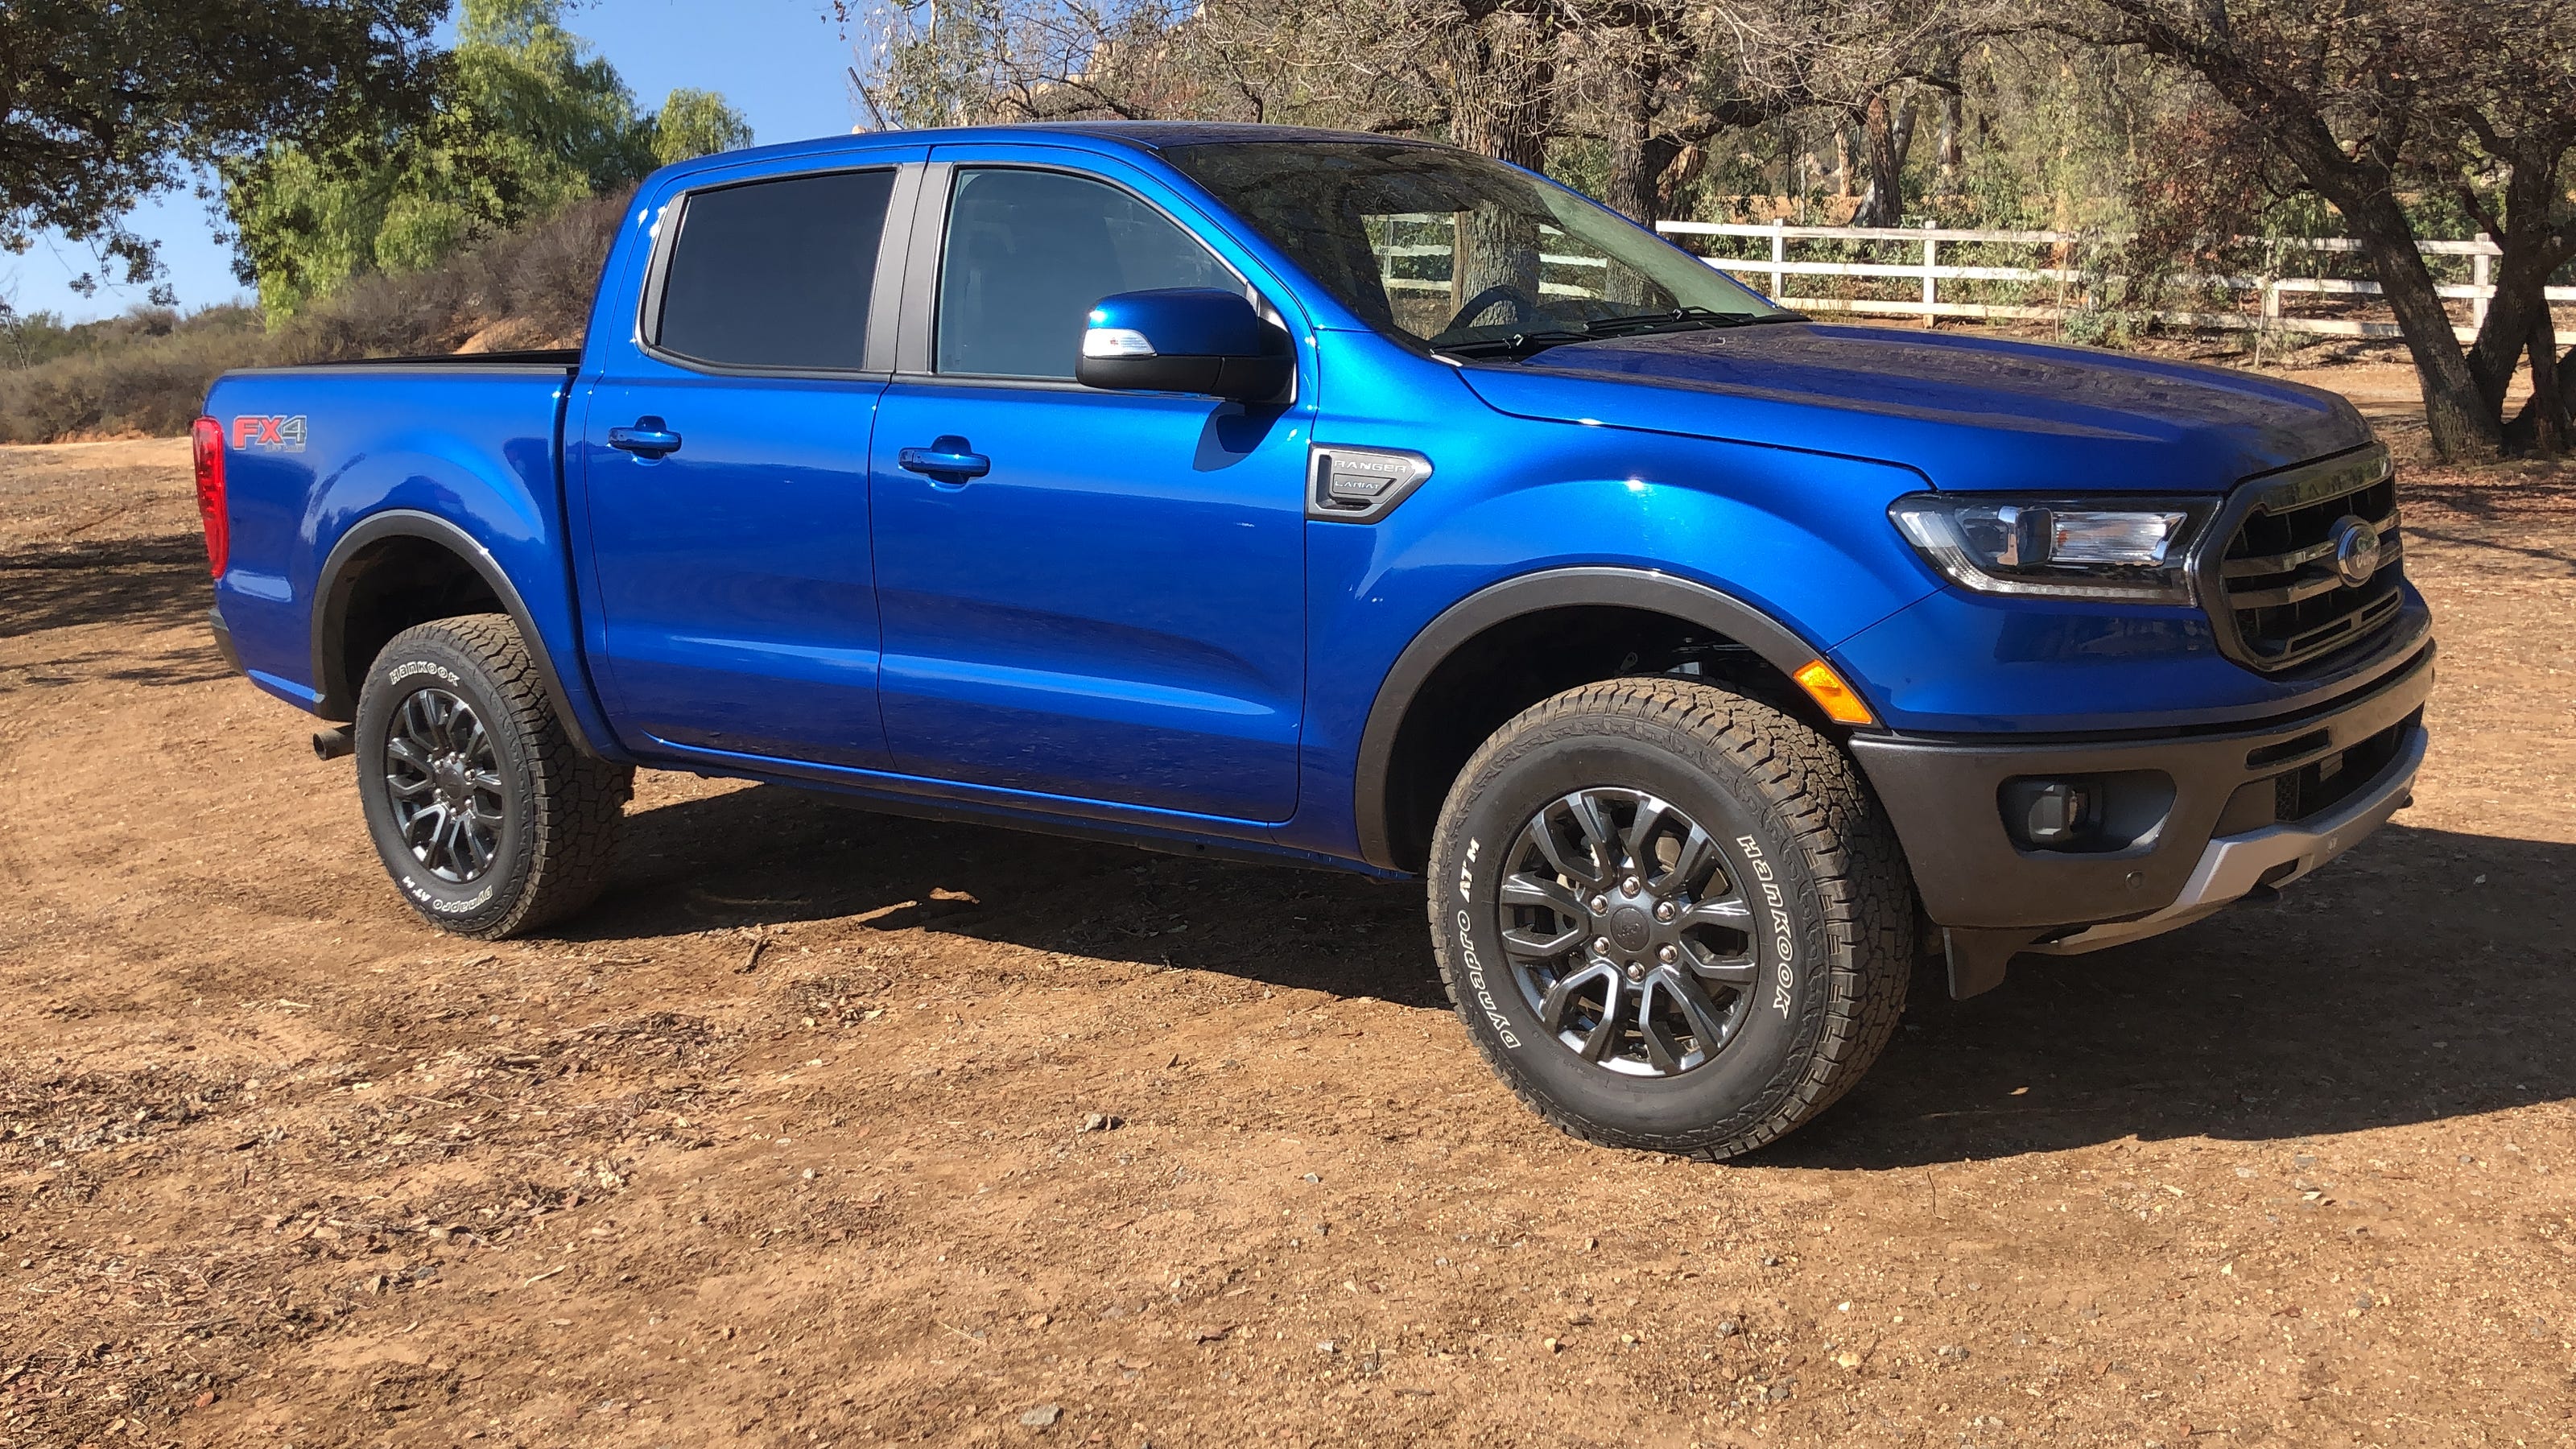 2019 Ford Ranger drive shows it's fit for city and off road